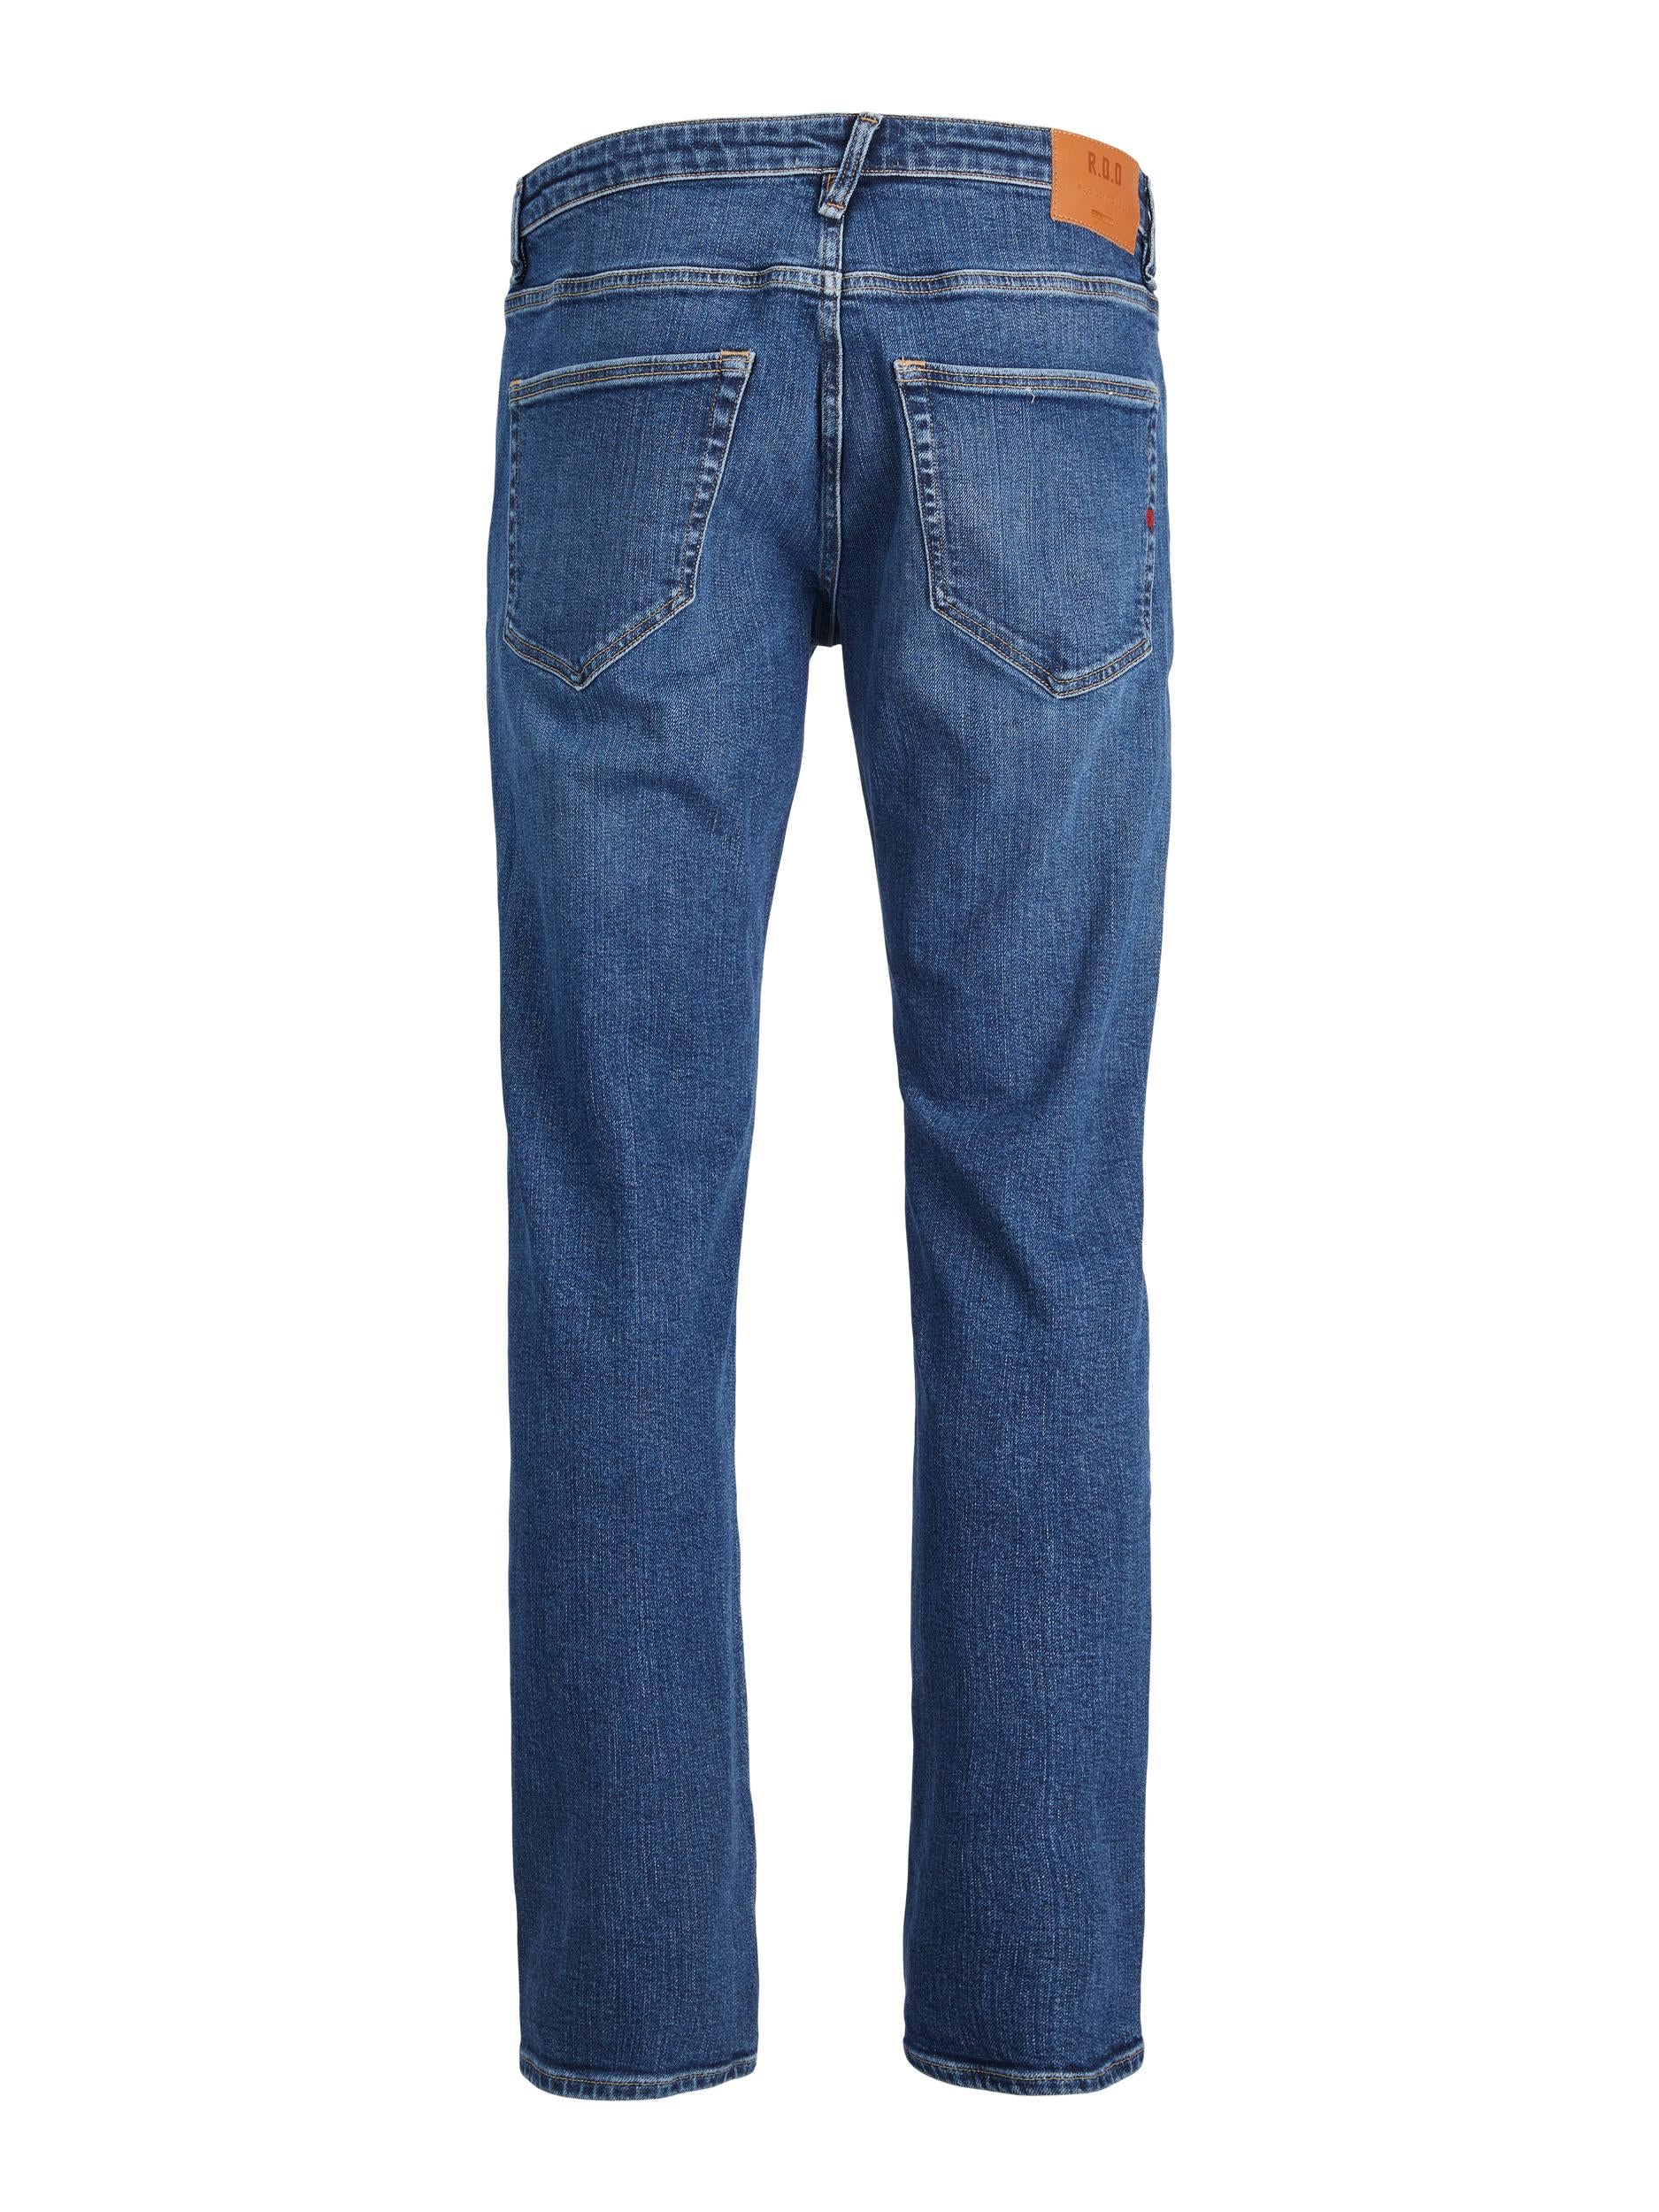 Men's Royal Comfort 811 Jeans-Ghost Back View